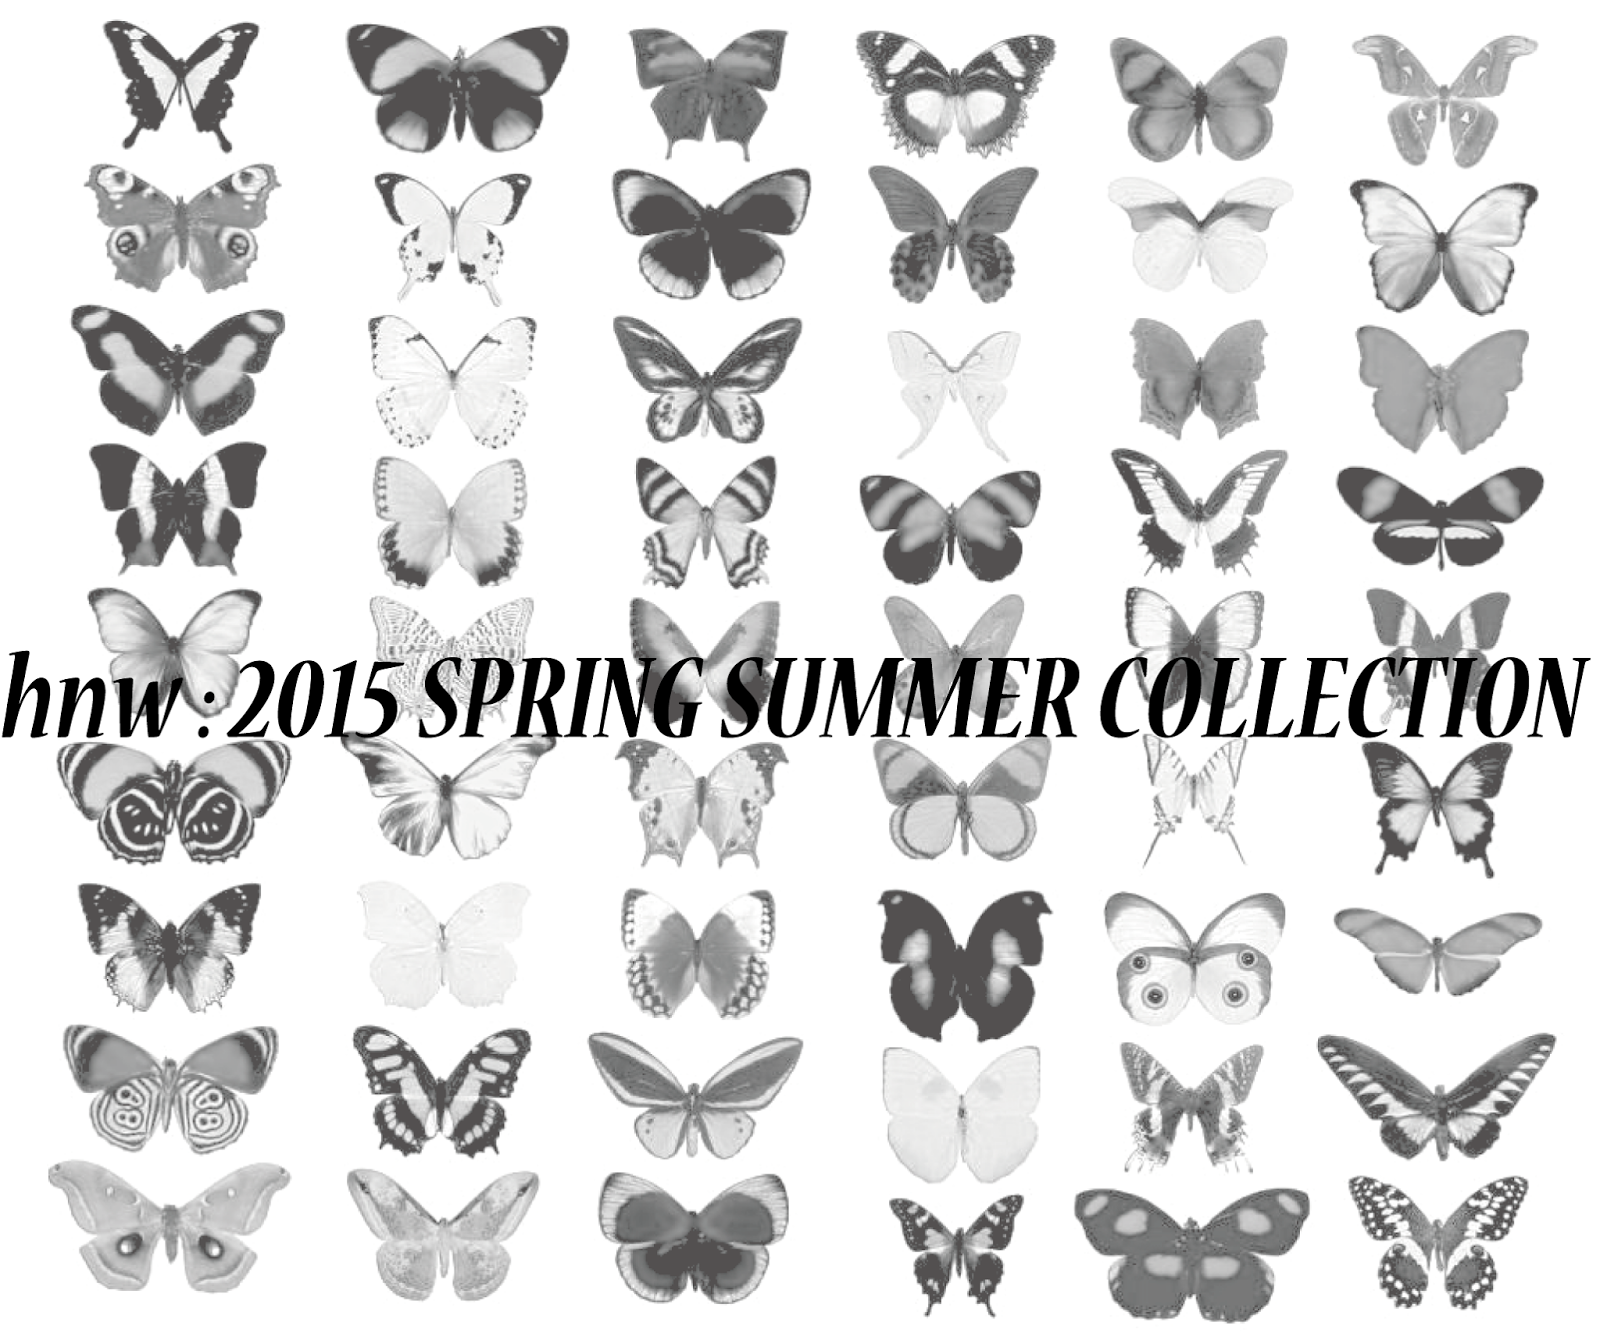 hnw blog: hnw 2015 Spring Summer Collection Preview.